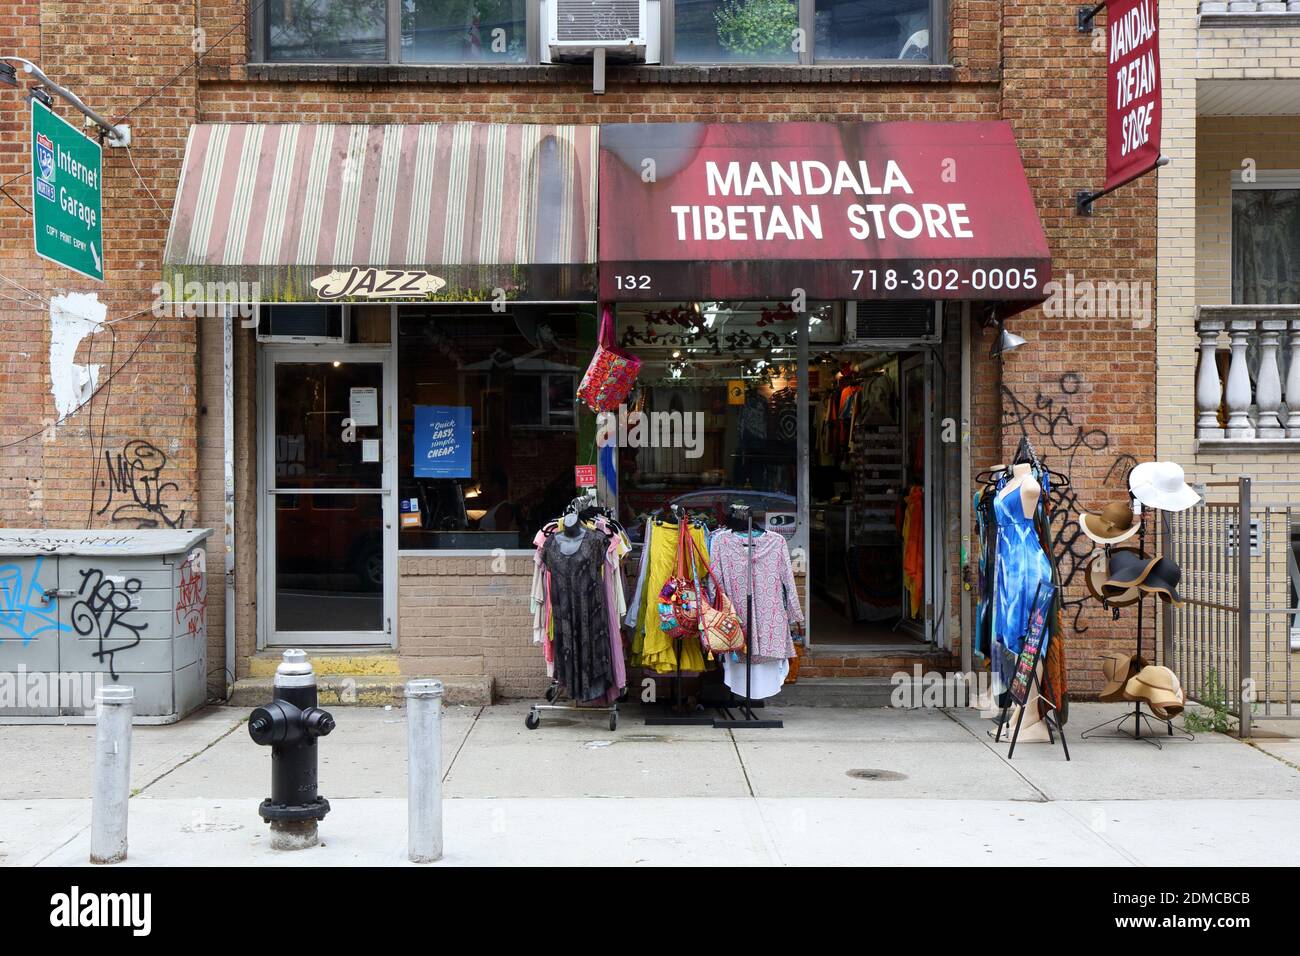 Mandala Tibetan Store, Jazz, 132 N 5th St, Brooklyn, New York. NYC storefront photo of a gift store and clothing shop in the Williamsburg neighborhood Stock Photo